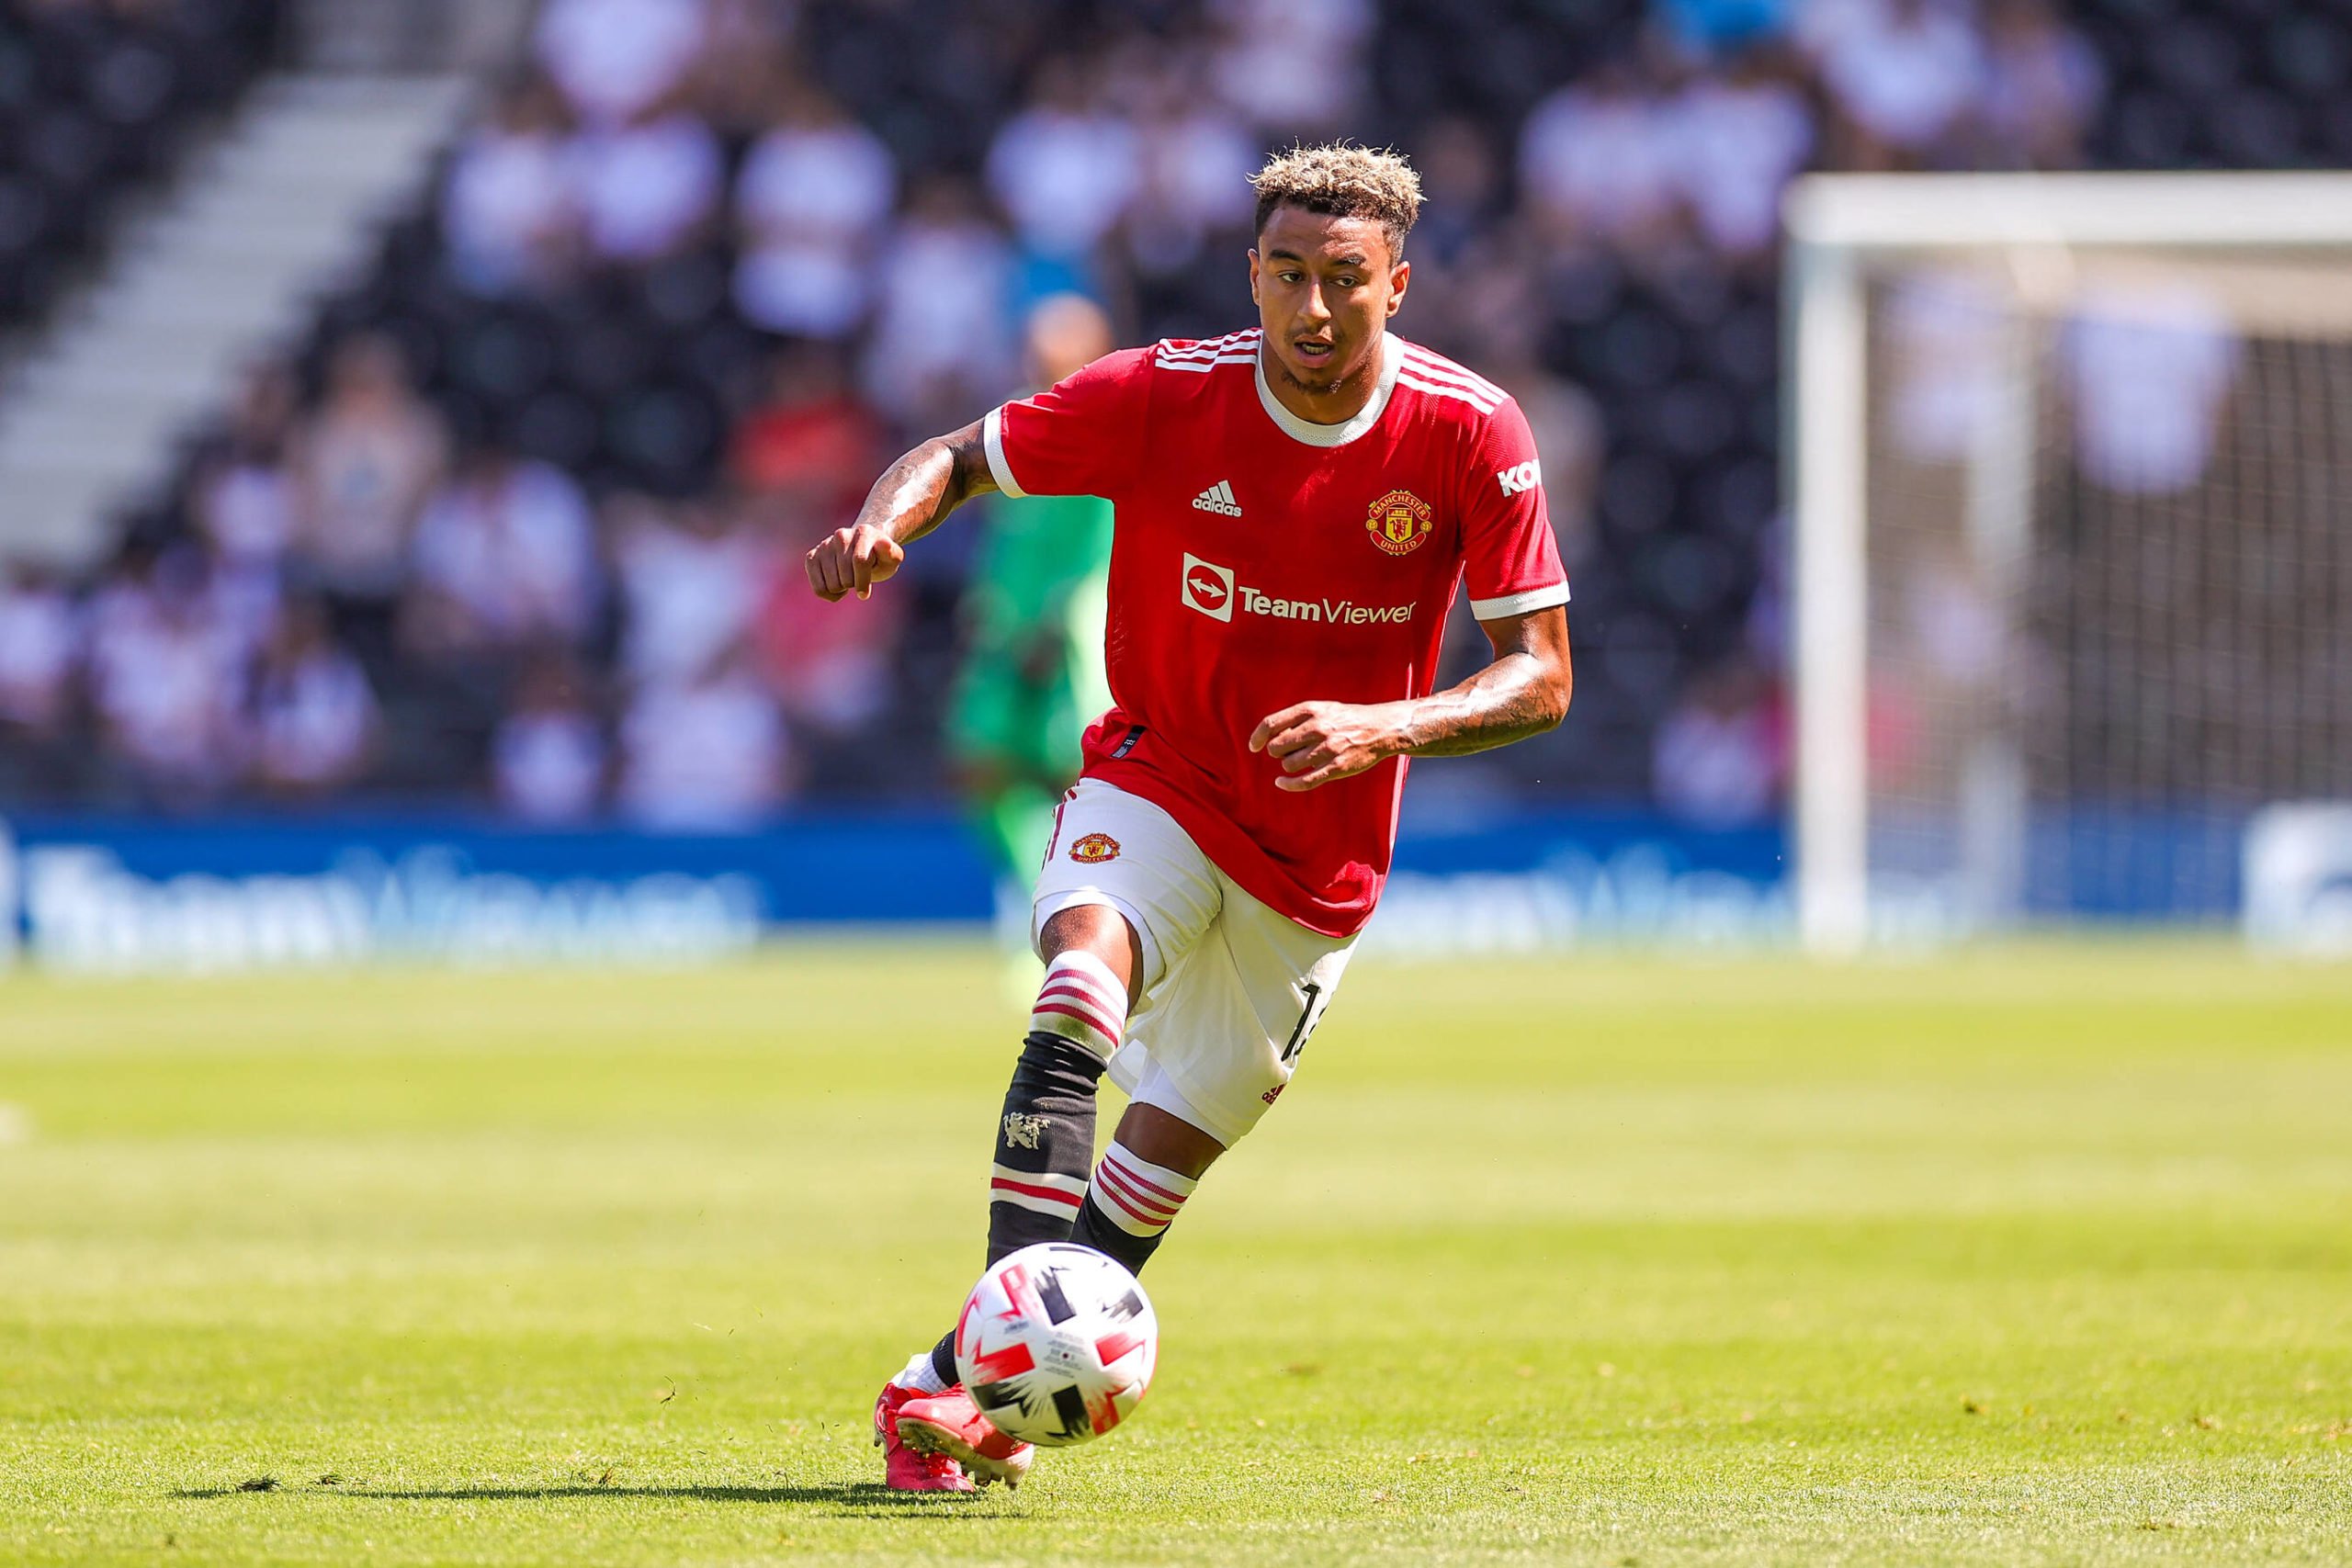 West Ham United are serious contenders for Lingard who is seen in the picture